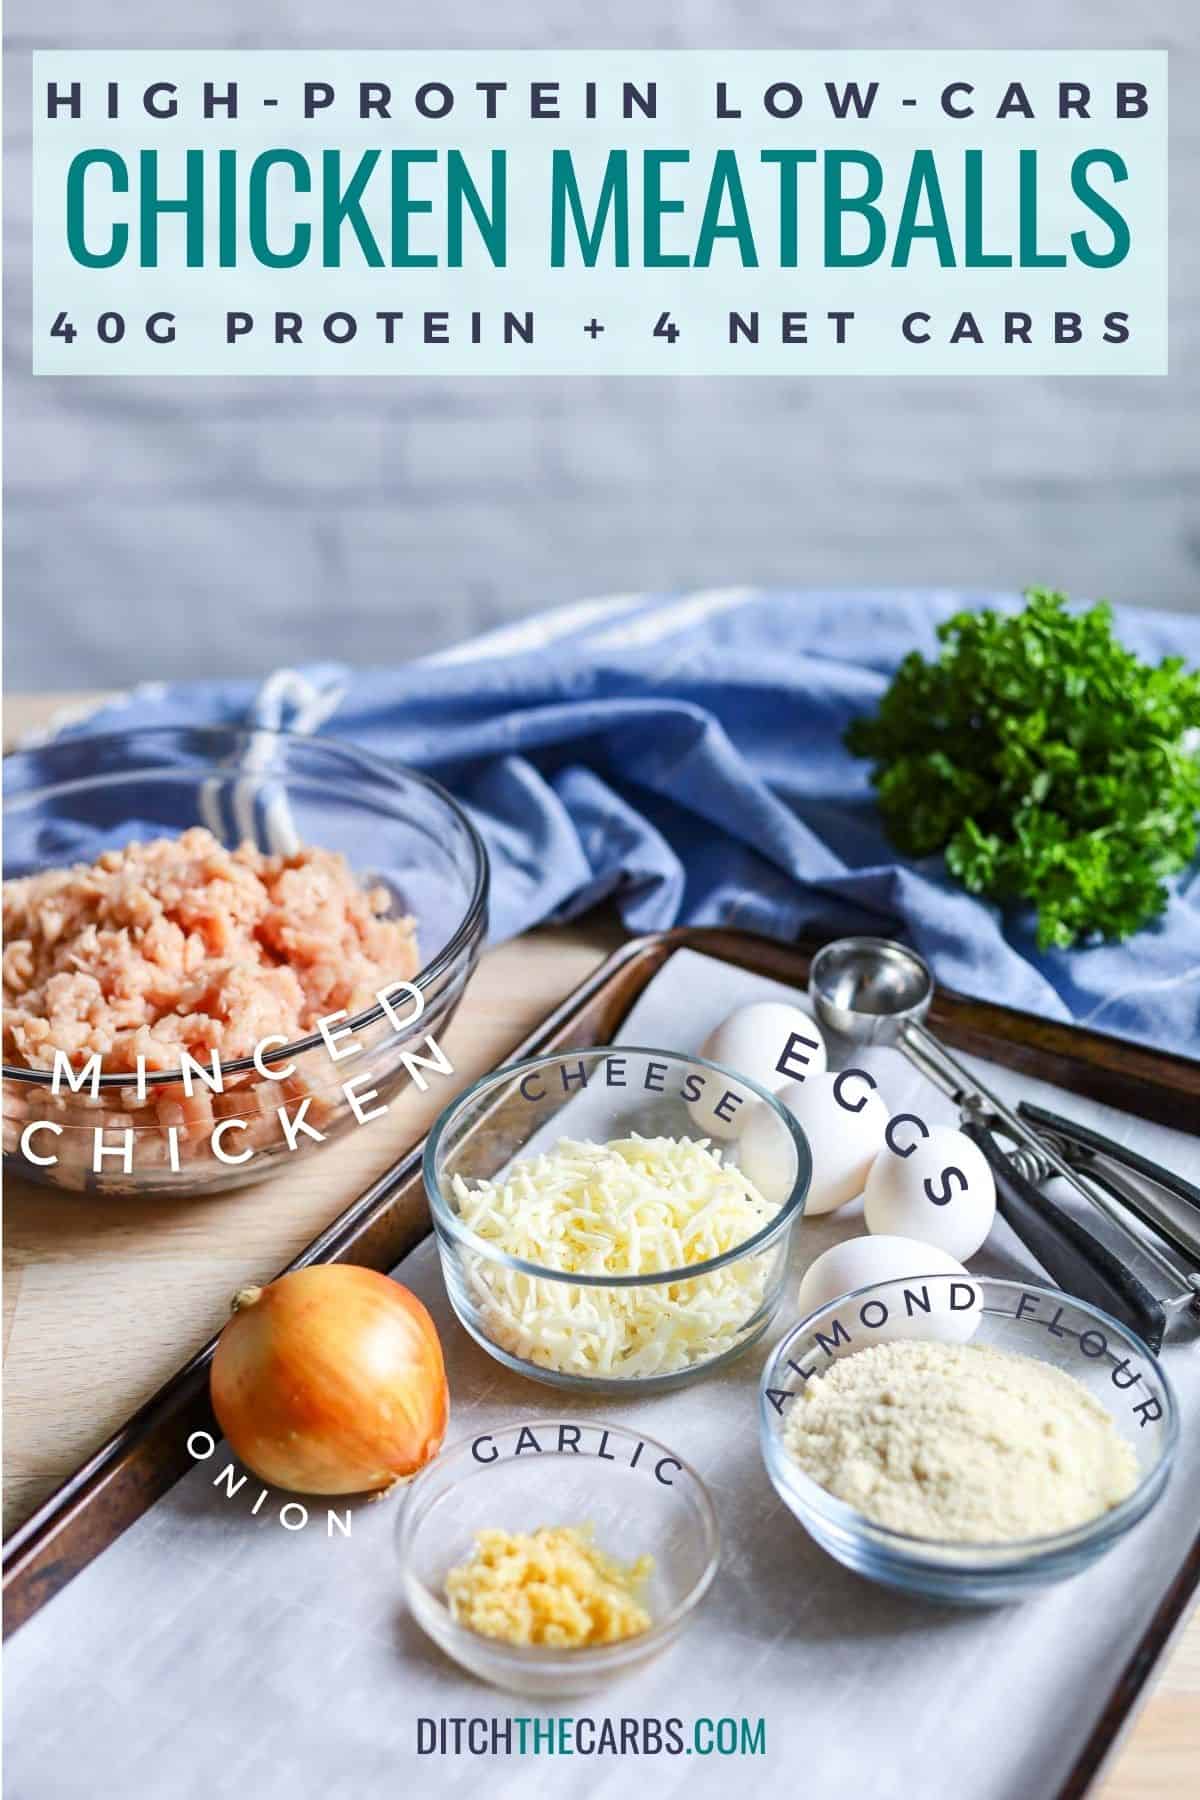 ingredients needed for cheesy chicken meatballs high-protein low-carb (HPLC)